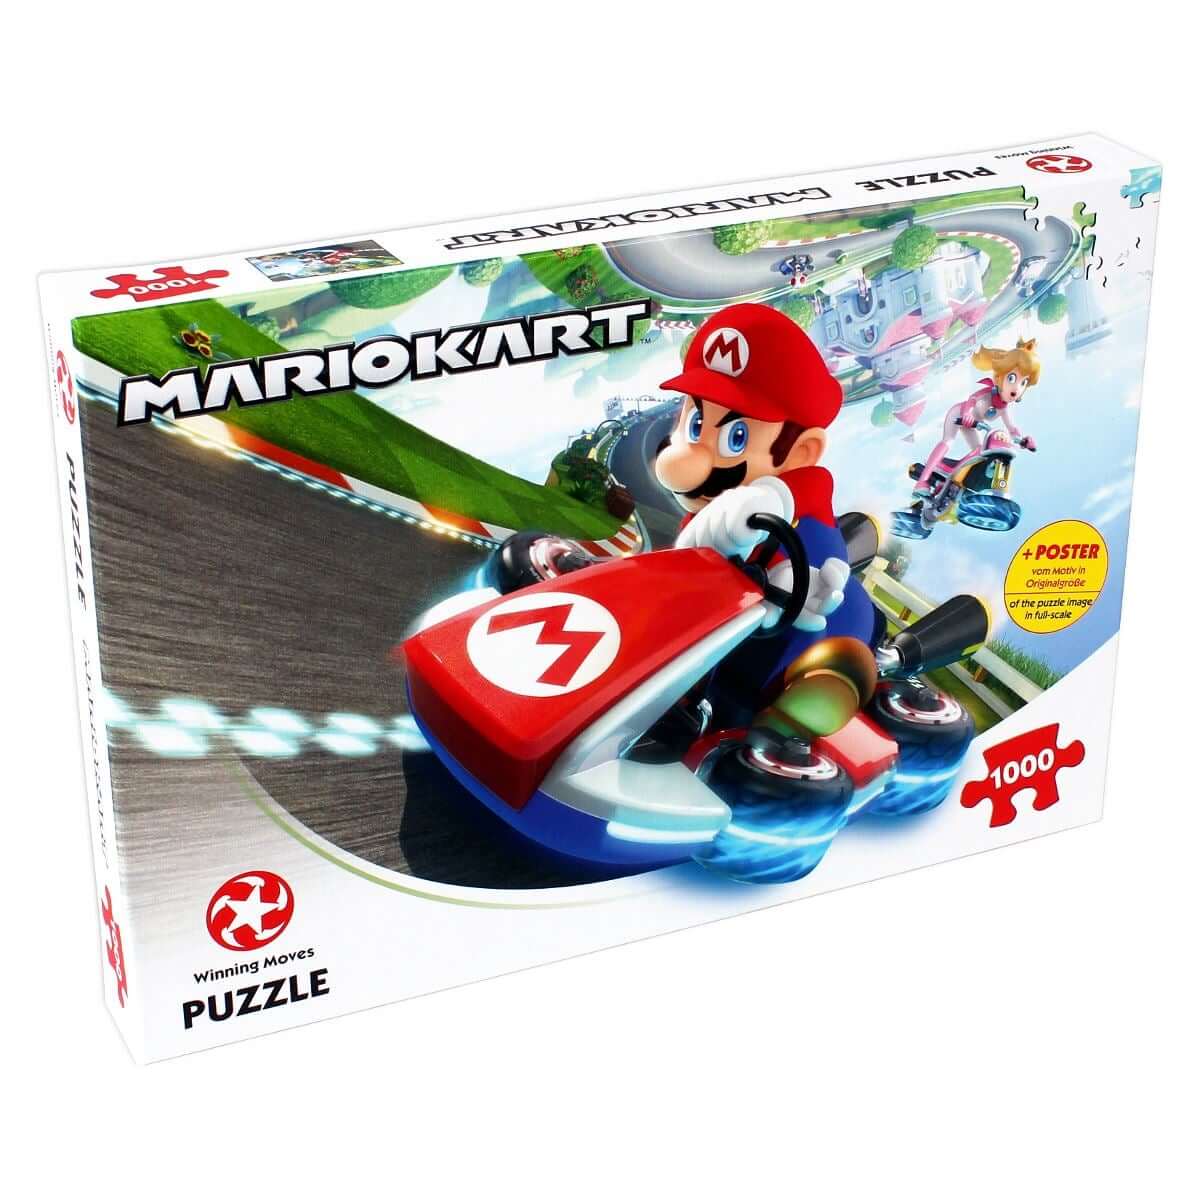 Mario kart Funracer 1000pc Jigsaw Puzzle - Loaded Dice